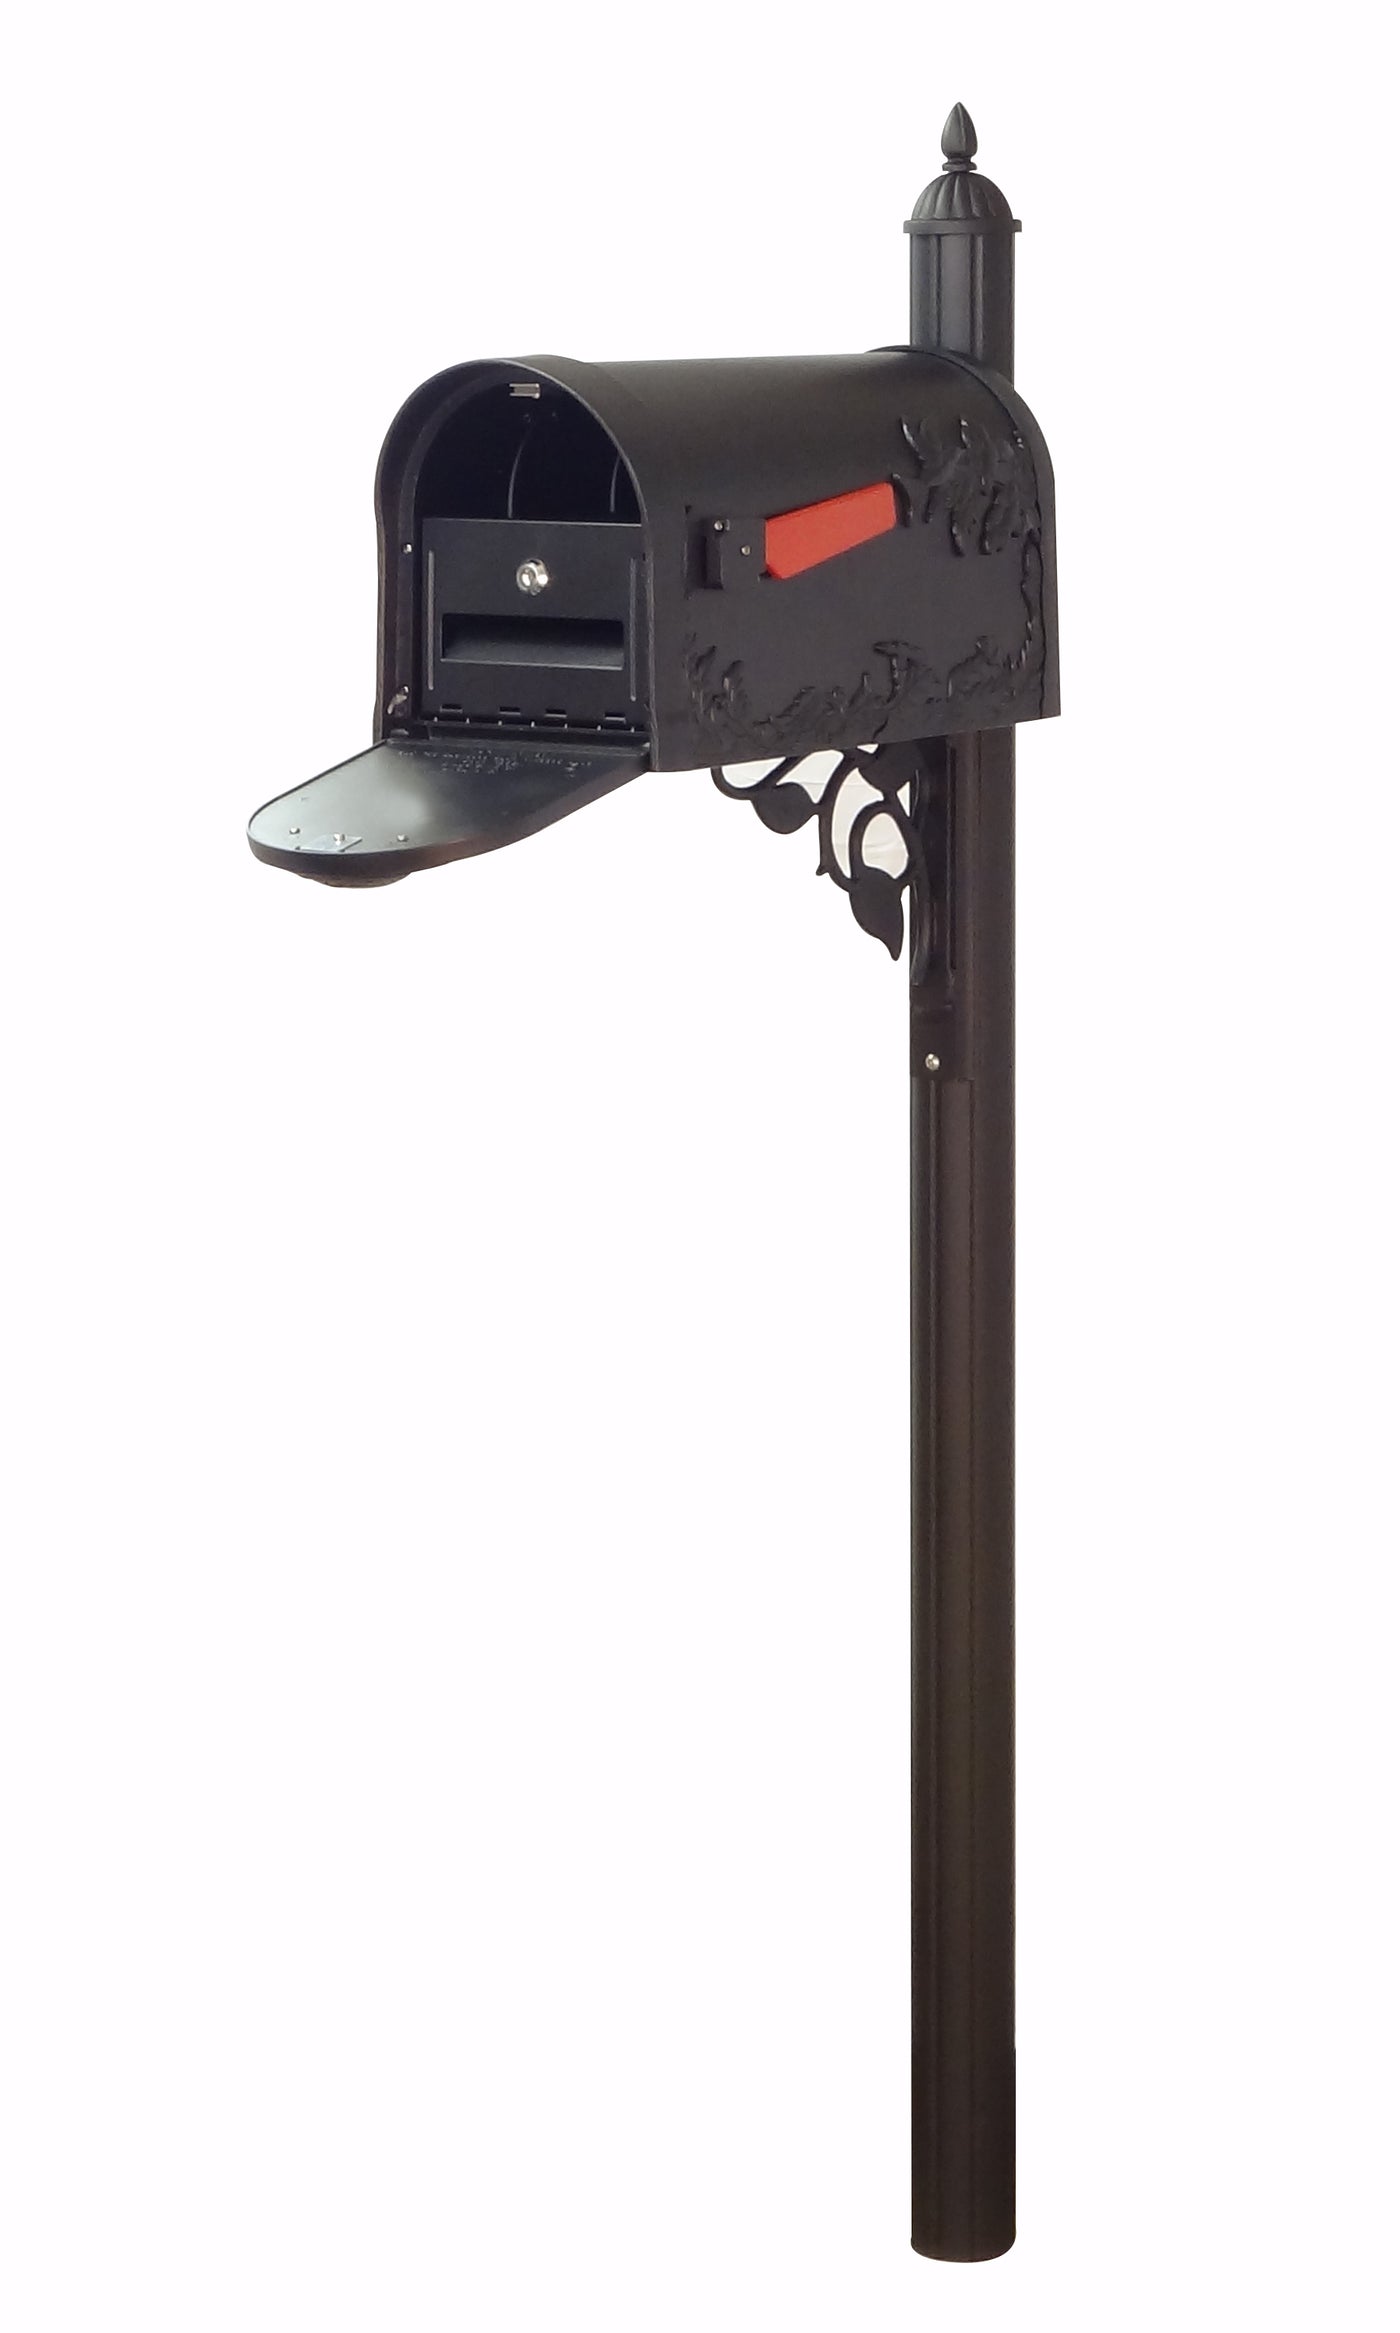 Hummingbird Curbside Mailbox with Locking Insert and Albion Mailbox Post